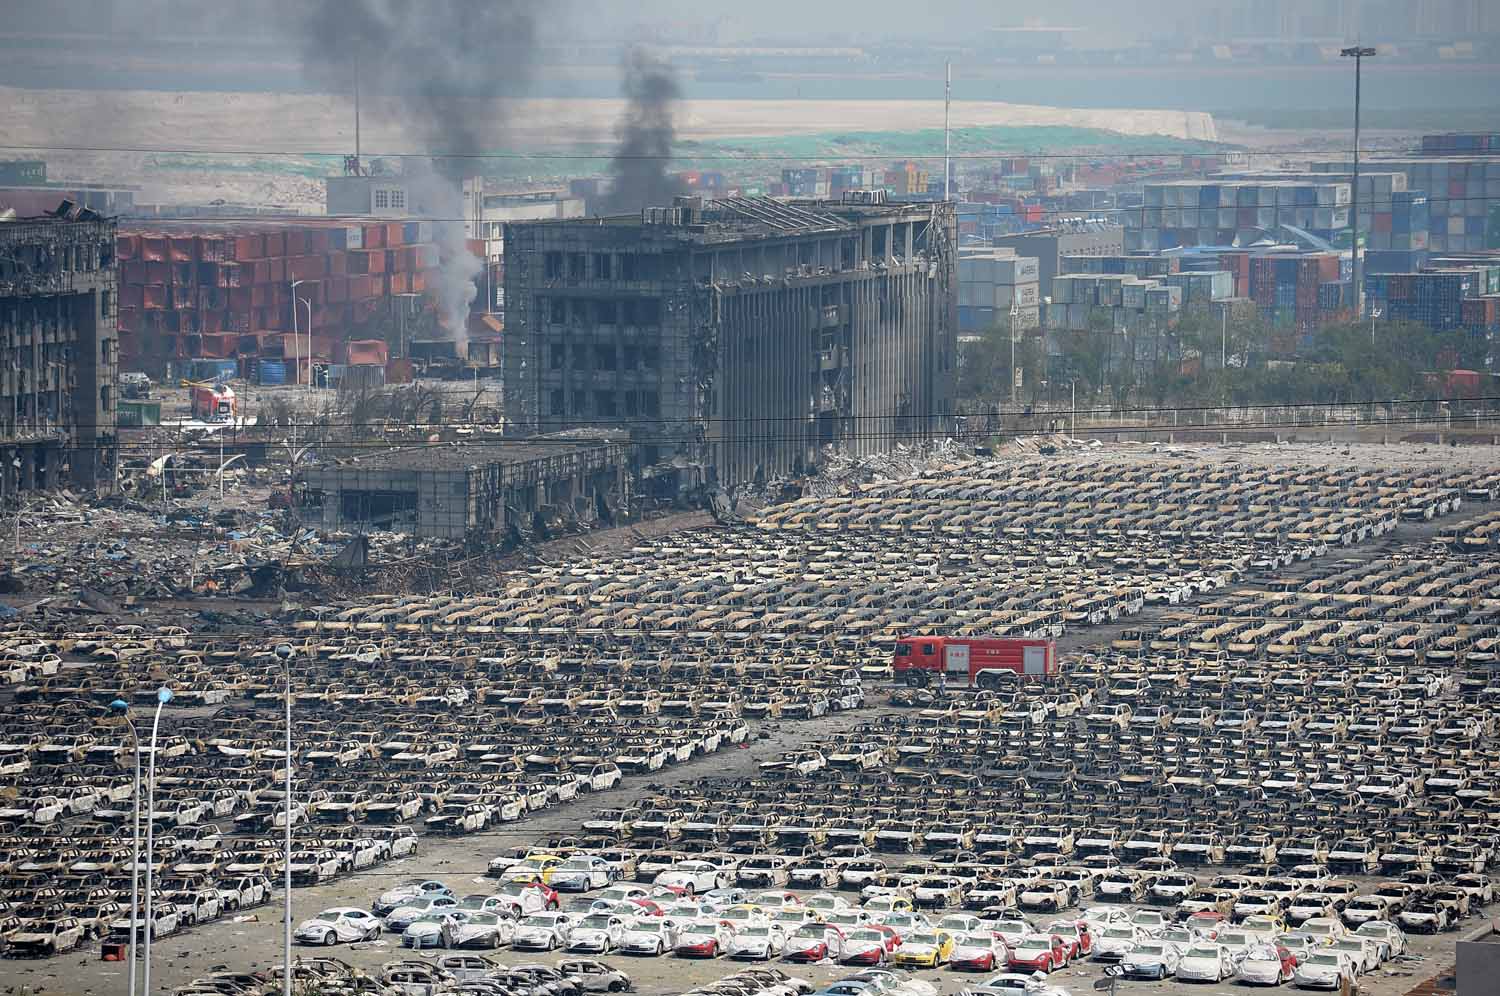 TIANJIN, CHINA - AUGUST 13:  (CHINA OUT) Thousands of burnt and destroyed vehicles are seen in Tianjin's warehouse explosion on August 13, 2015 in Tianjin, China. The death toll from Wednesday warehouse explosions in Tianjin rose to 50 Thursday evening, 17 of whom were firemen, local authorities said.  (Photo by ChinaFotoPress/ChinaFotoPress via Getty Images)